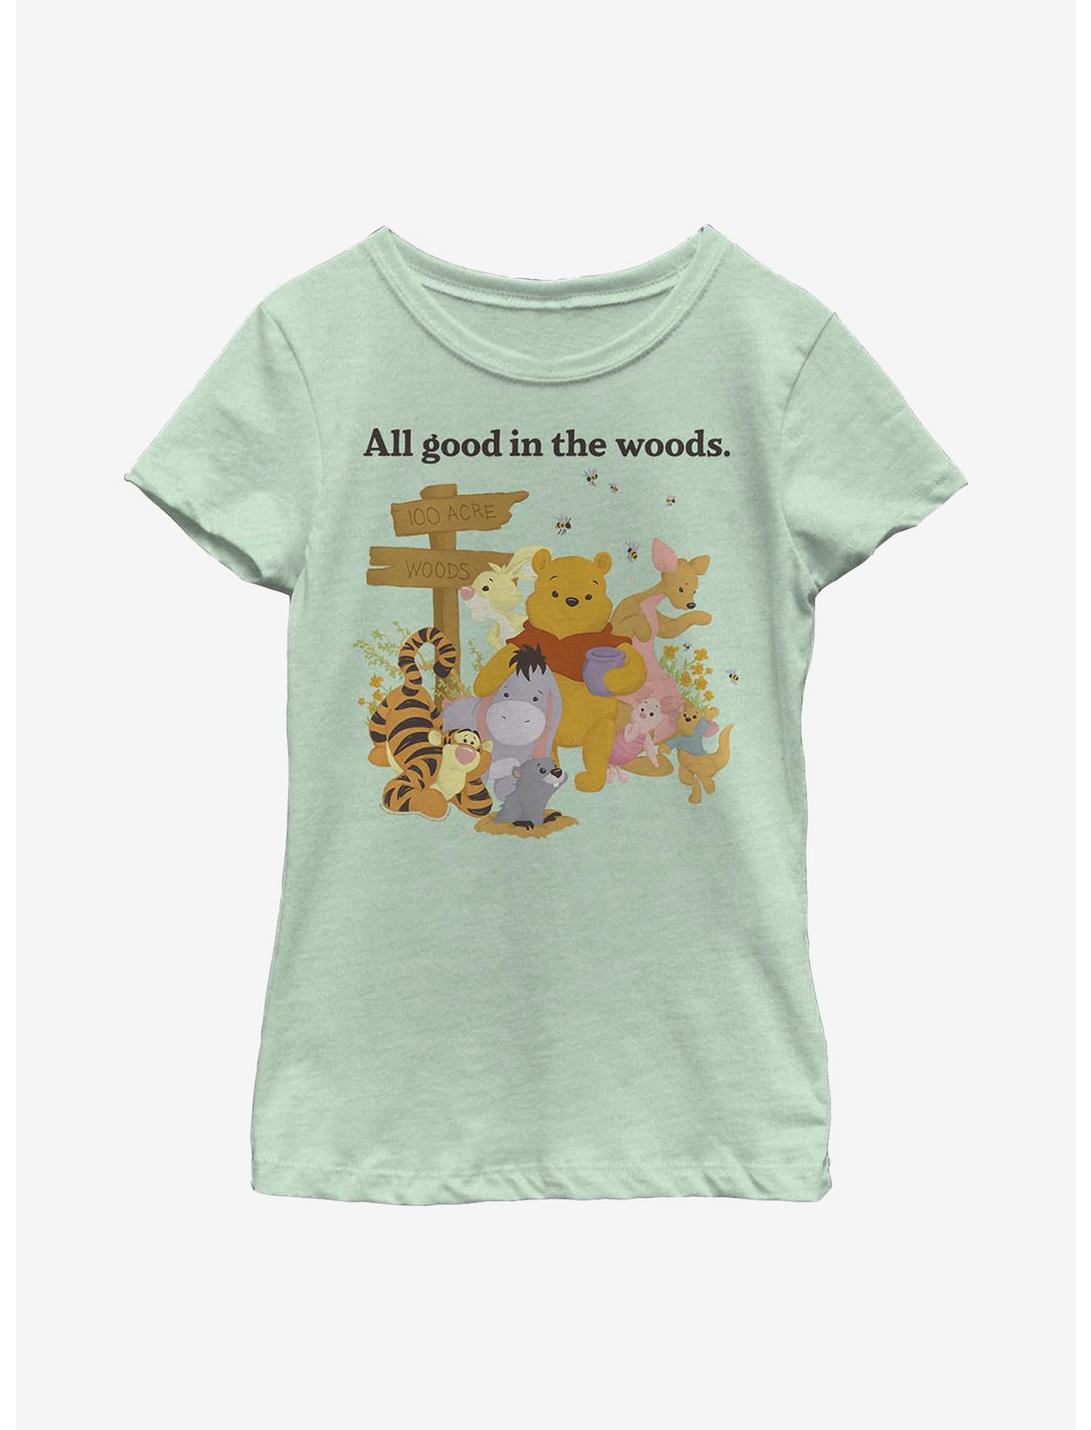 Disney Winnie The Pooh In The Woods Youth Girls T-Shirt, MINT, hi-res